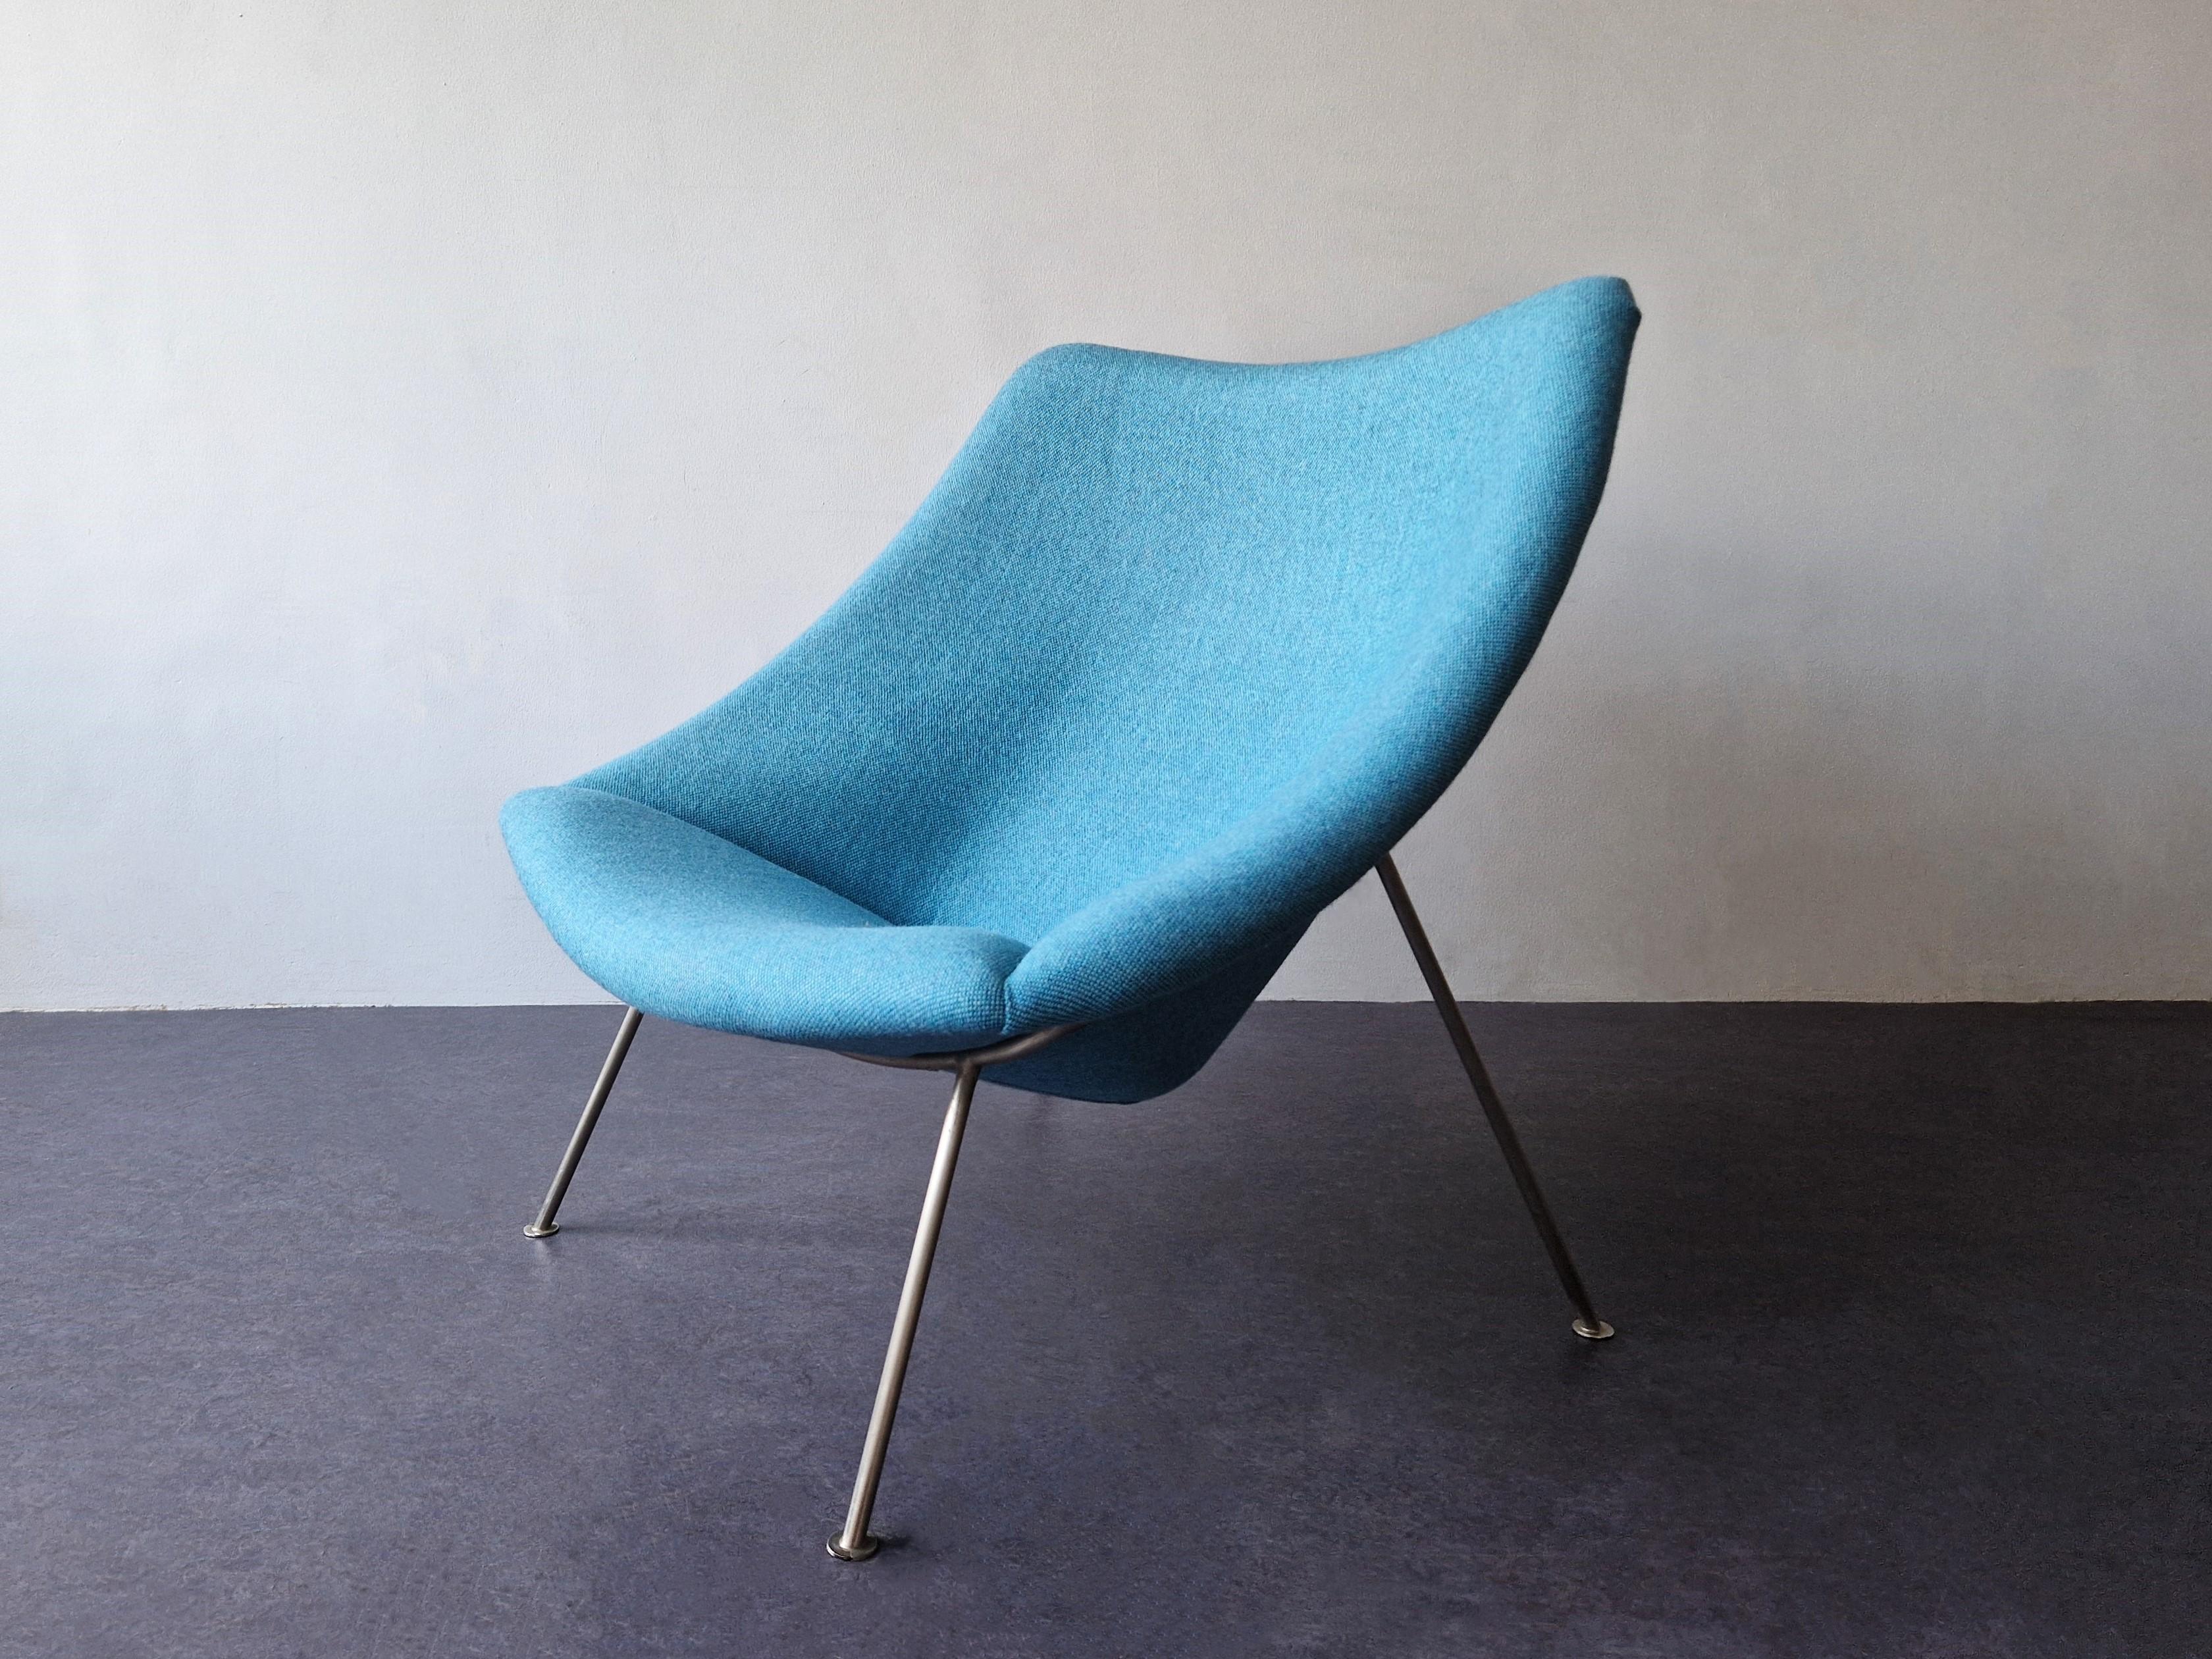 This iconic lounge chair, model Oyster or F157, was designed by Pierre Paulin for Artifort in 1958. This 'bucket' chair shows the distinction between the sitting and carrying area, that is so characteristic of the 1950's. The minimalistic